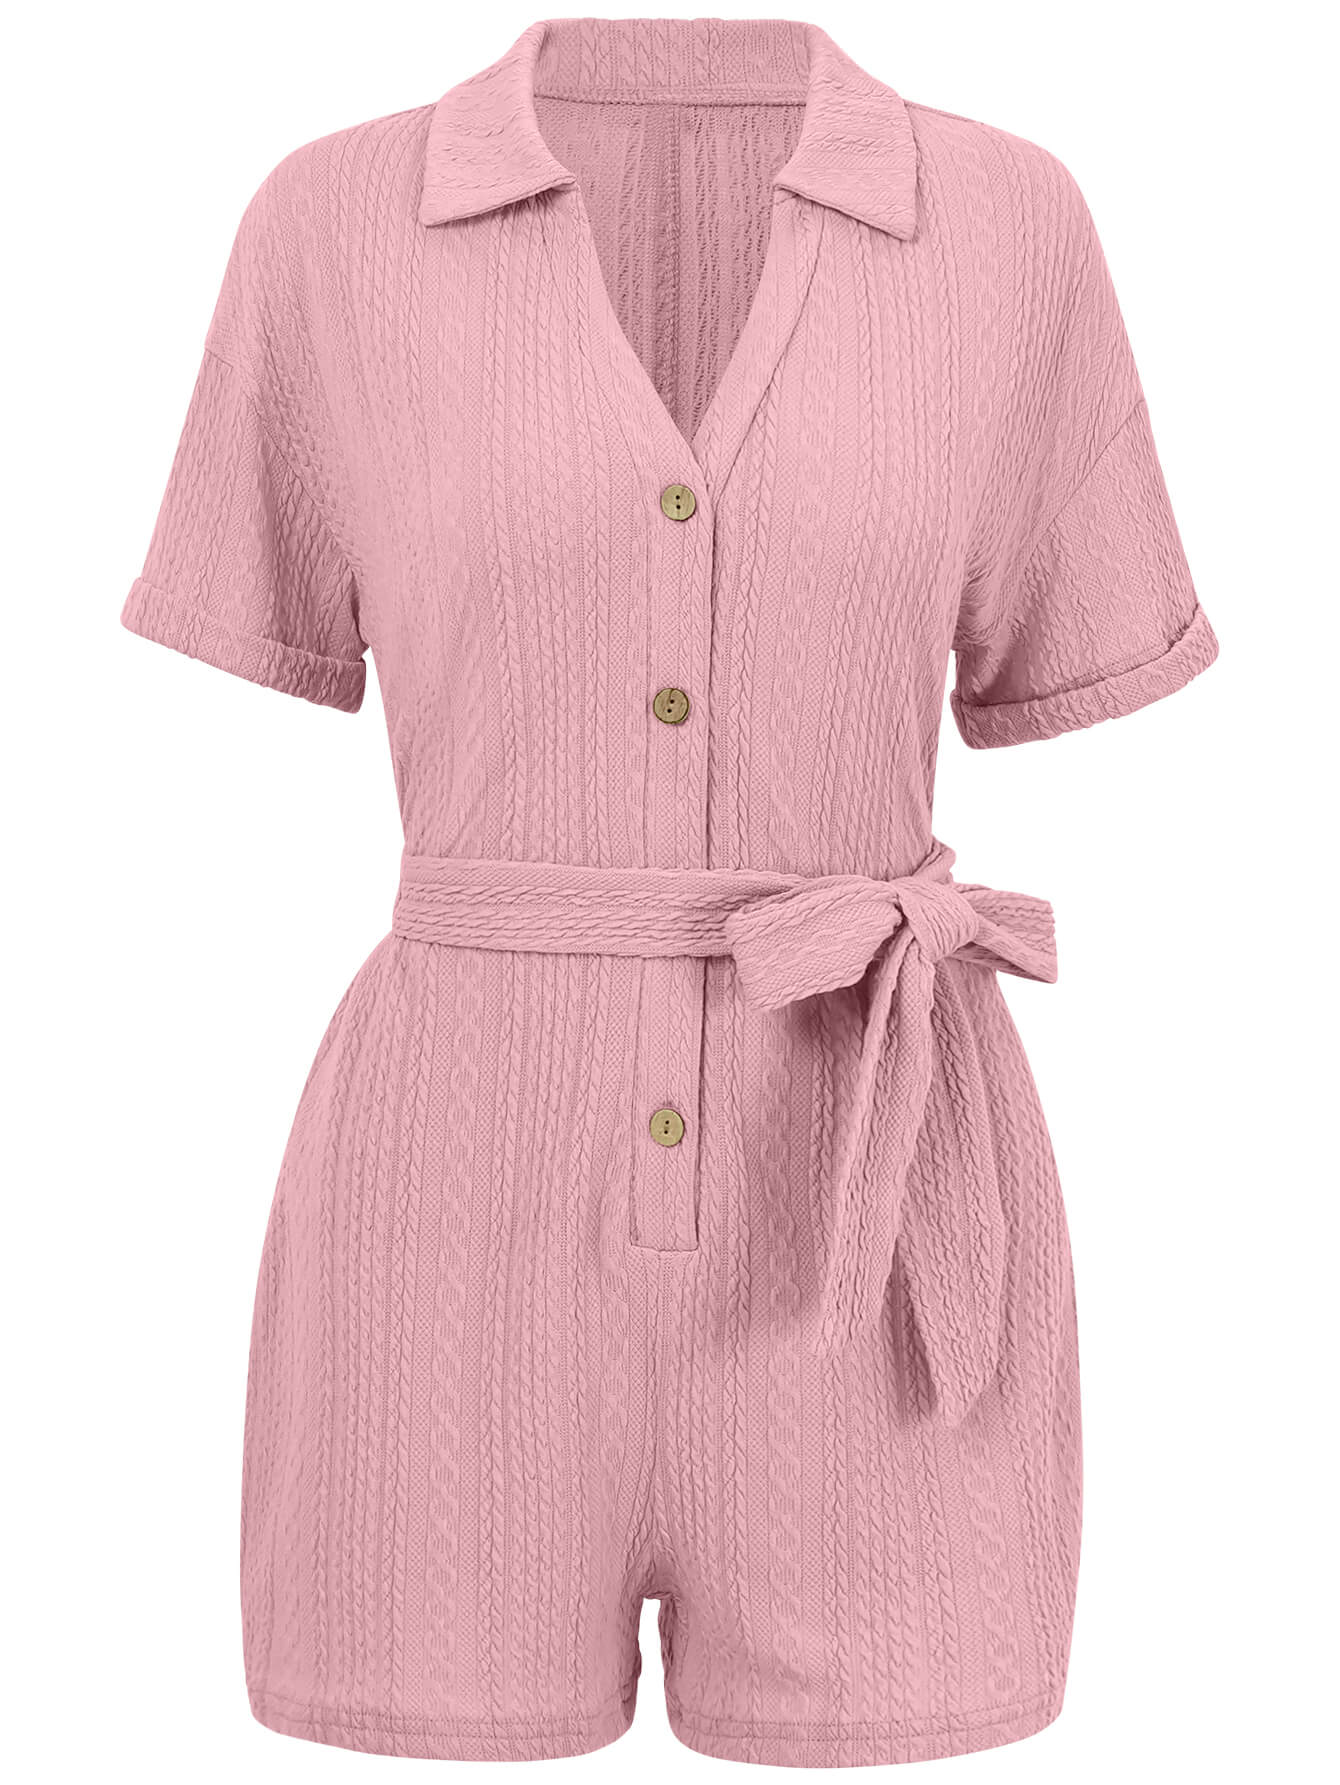 Grinnell Button Front Romper - Pink